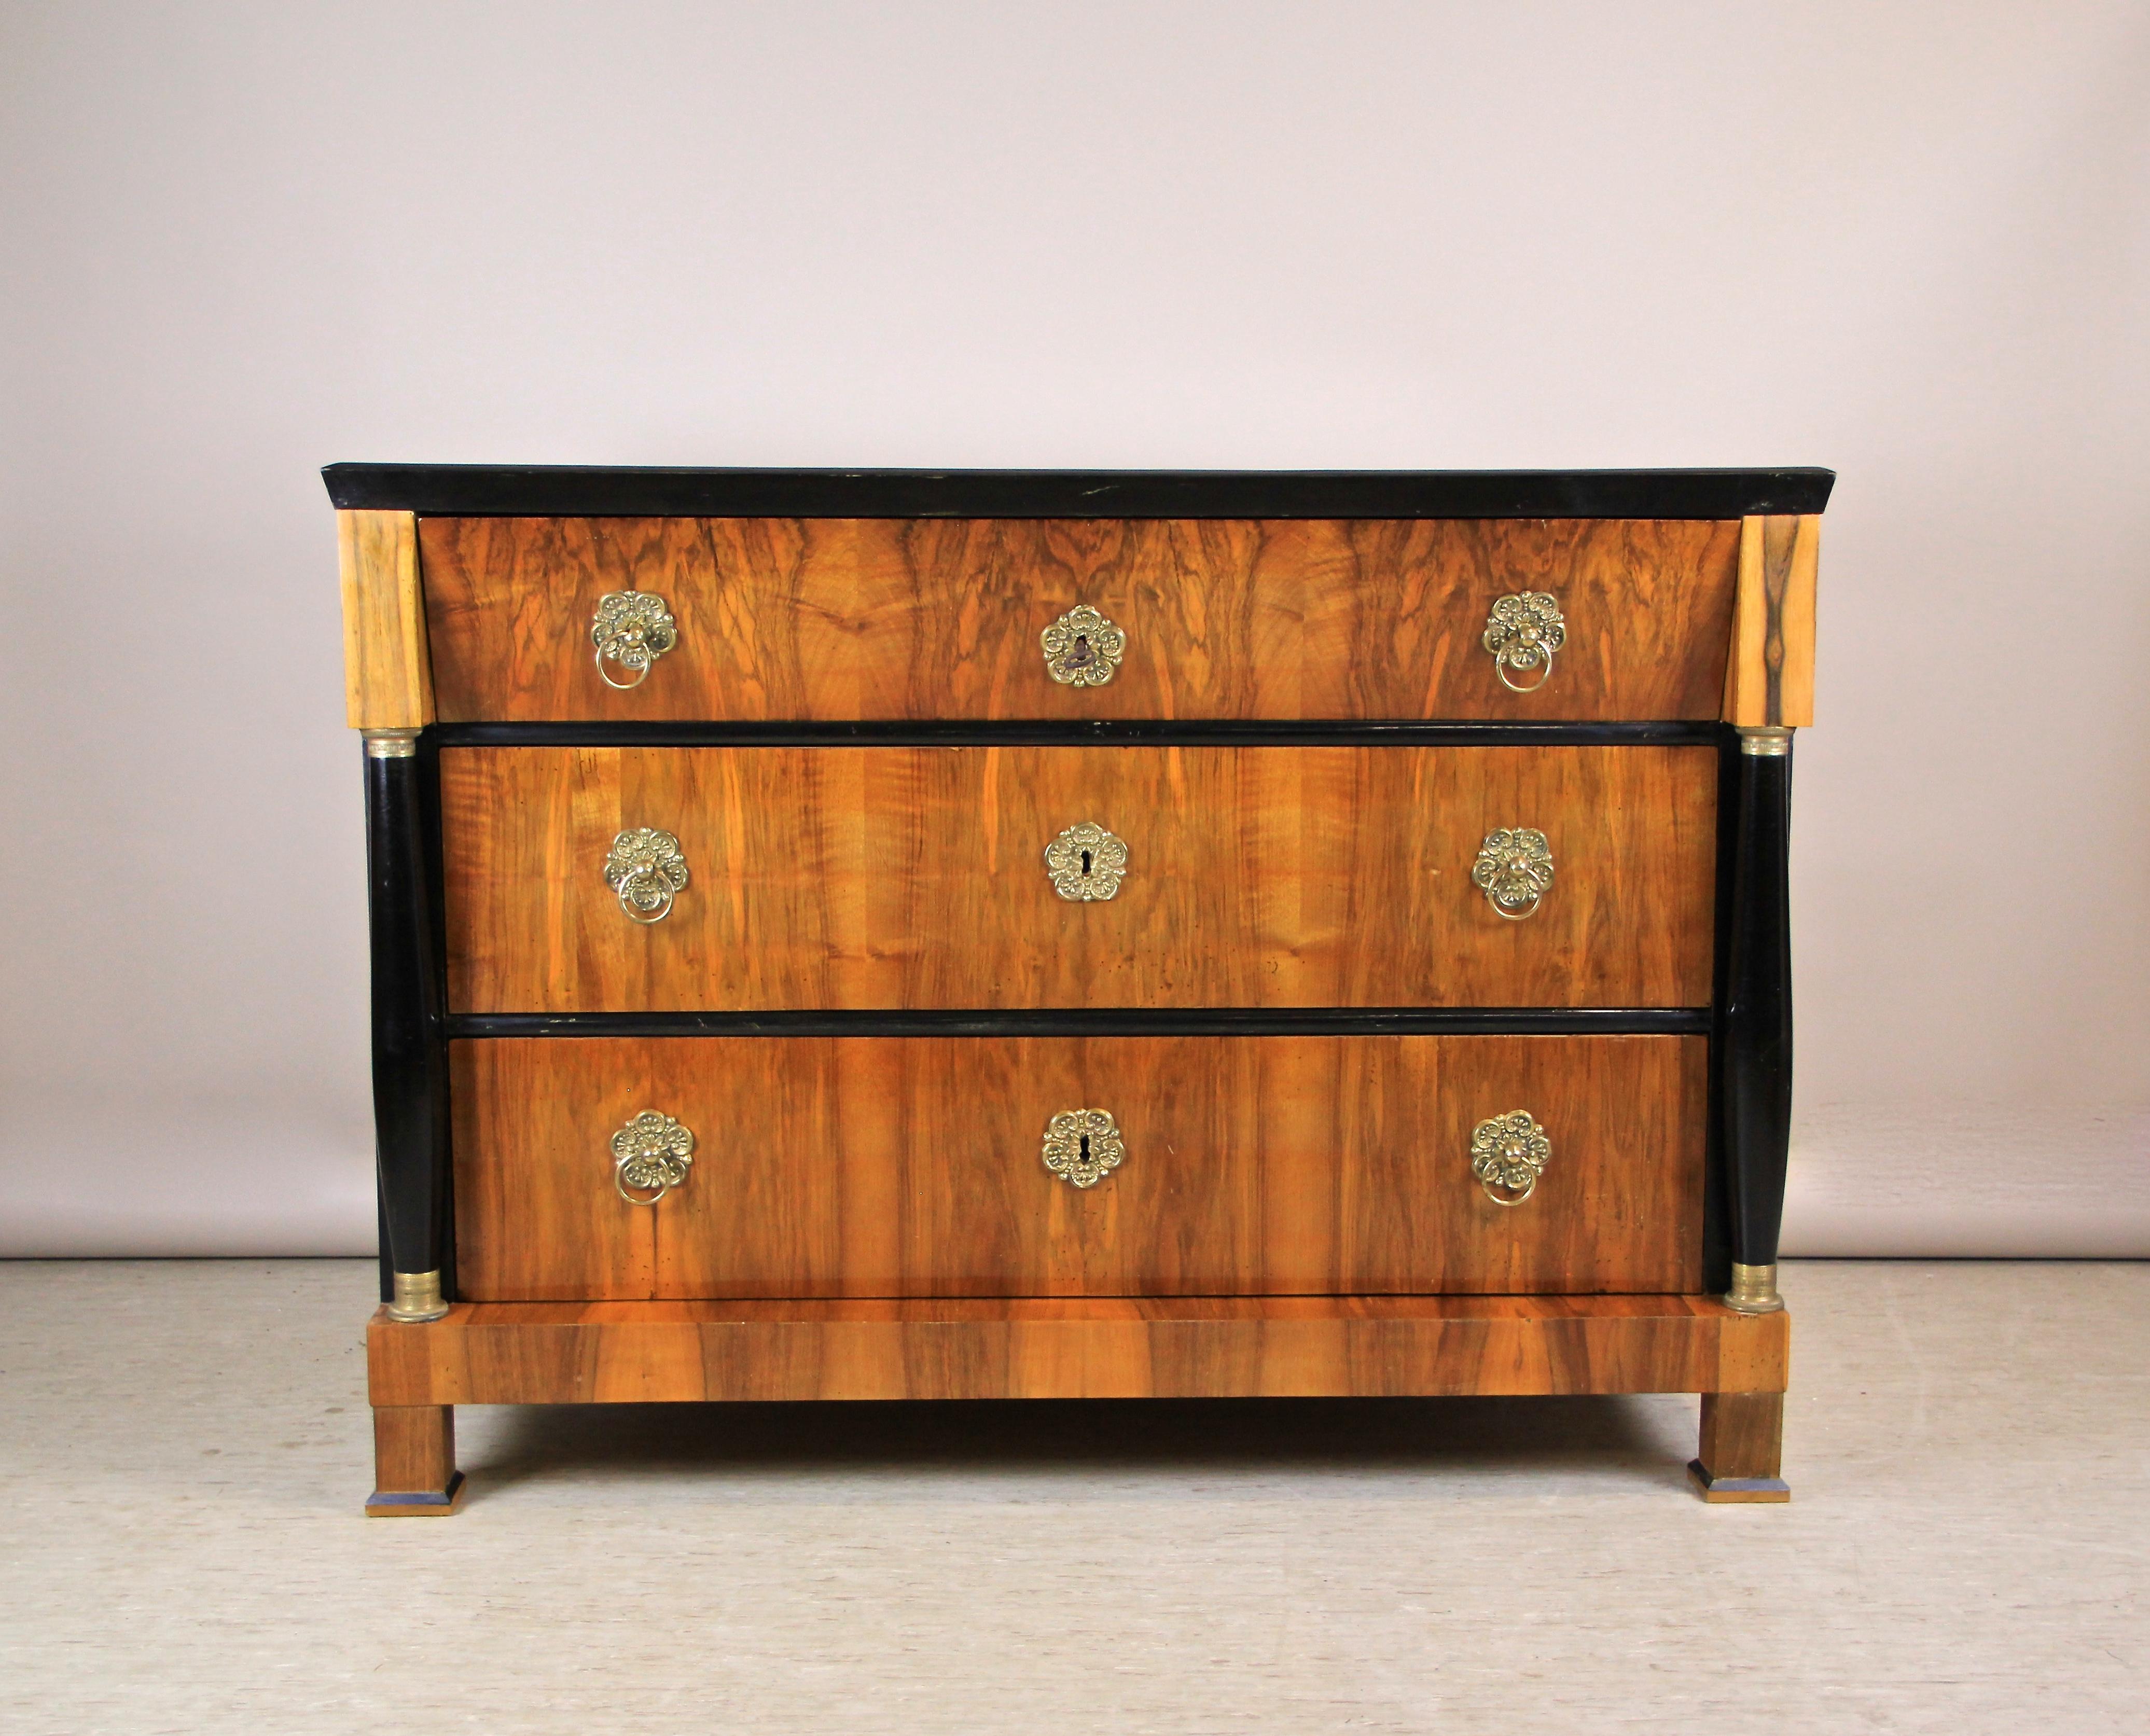 Remarkable Biedermeier chest of drawers from the early period circa 1825. This absolute gorgeous commode from Austria was veneered with great nut wood in a very fine manner. The top plate is adorned by an outstanding book matched walnut grain and